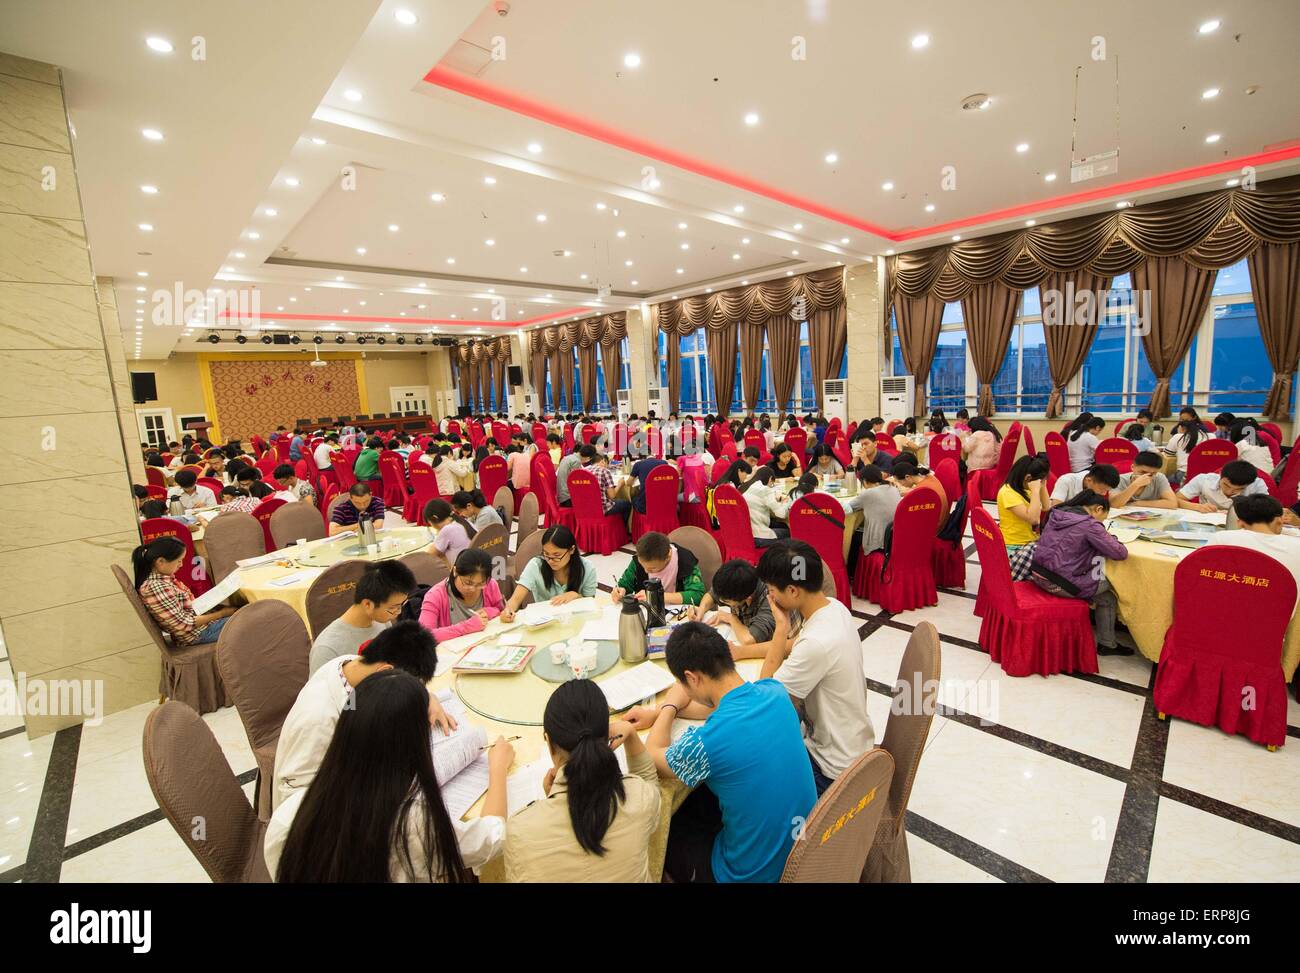 (150606) -- CHONGQING, June 6, 2015 (Xinhua) -- Students prepare for the coming national college entrance exams at the hall of a hotel in Bishan District of Chongqing, southwest China, June 6, 2015, one day before the exams.  About 1300 students of Laifeng High School would attend the exam in Bishan District, a site 20 kilometers away from their school, on June 7 and 8, therefore, most of the students booked hotels near the exam site and prepared for the exam at the last night. (Xinhua/Liu Chan) (zkr) Stock Photo